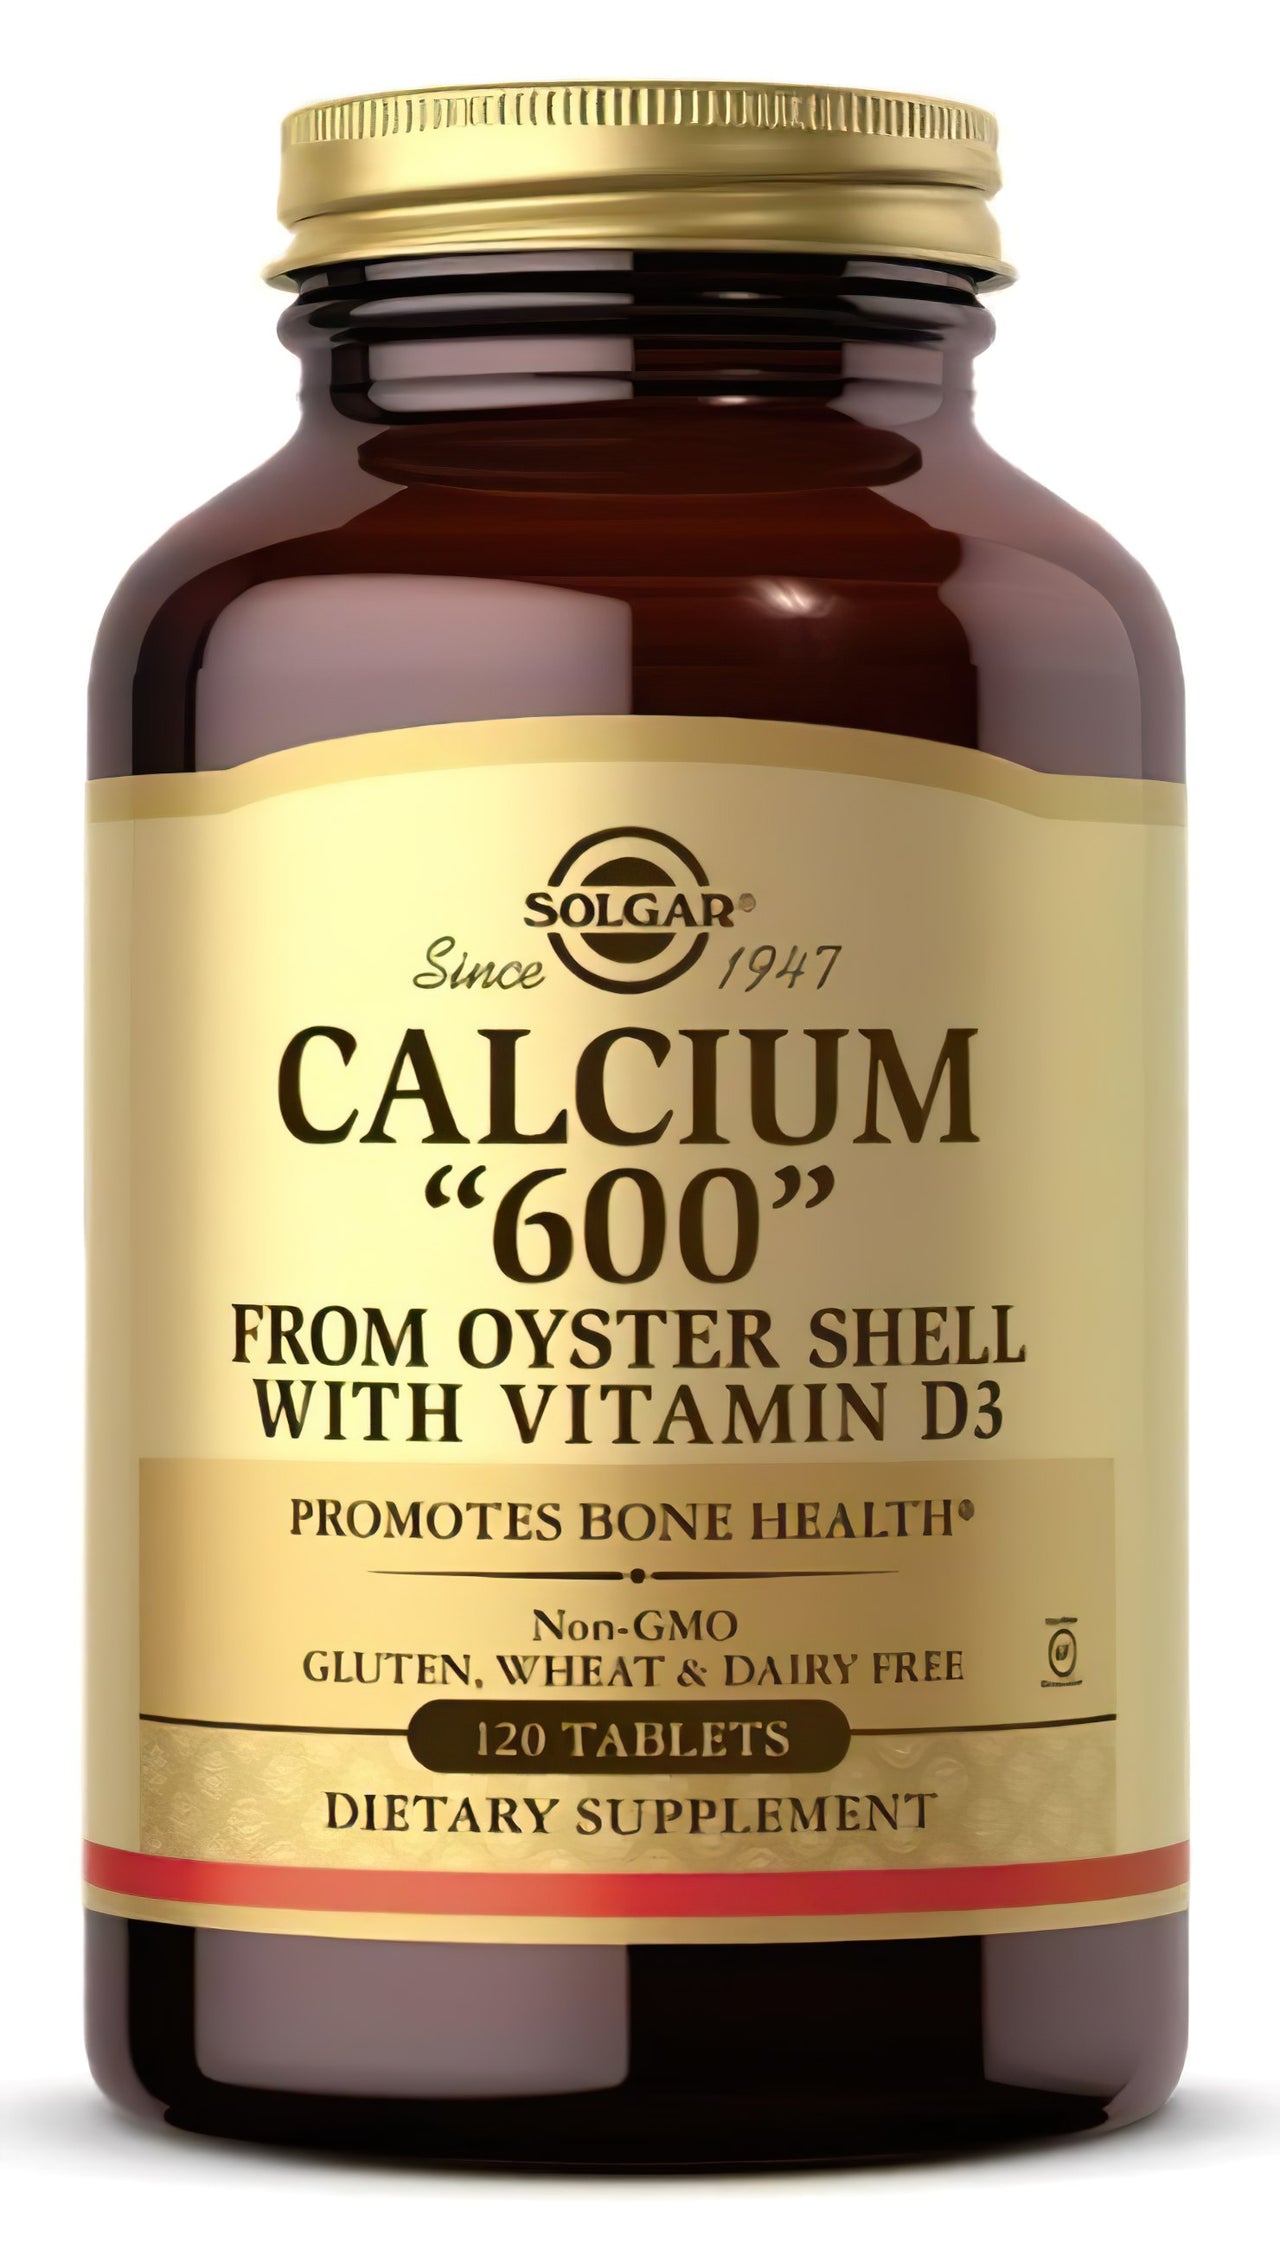 A bottle of Solgar's Calcium "600" 120 tablets (from oyster shell with vitamin D3) from oyster shell.